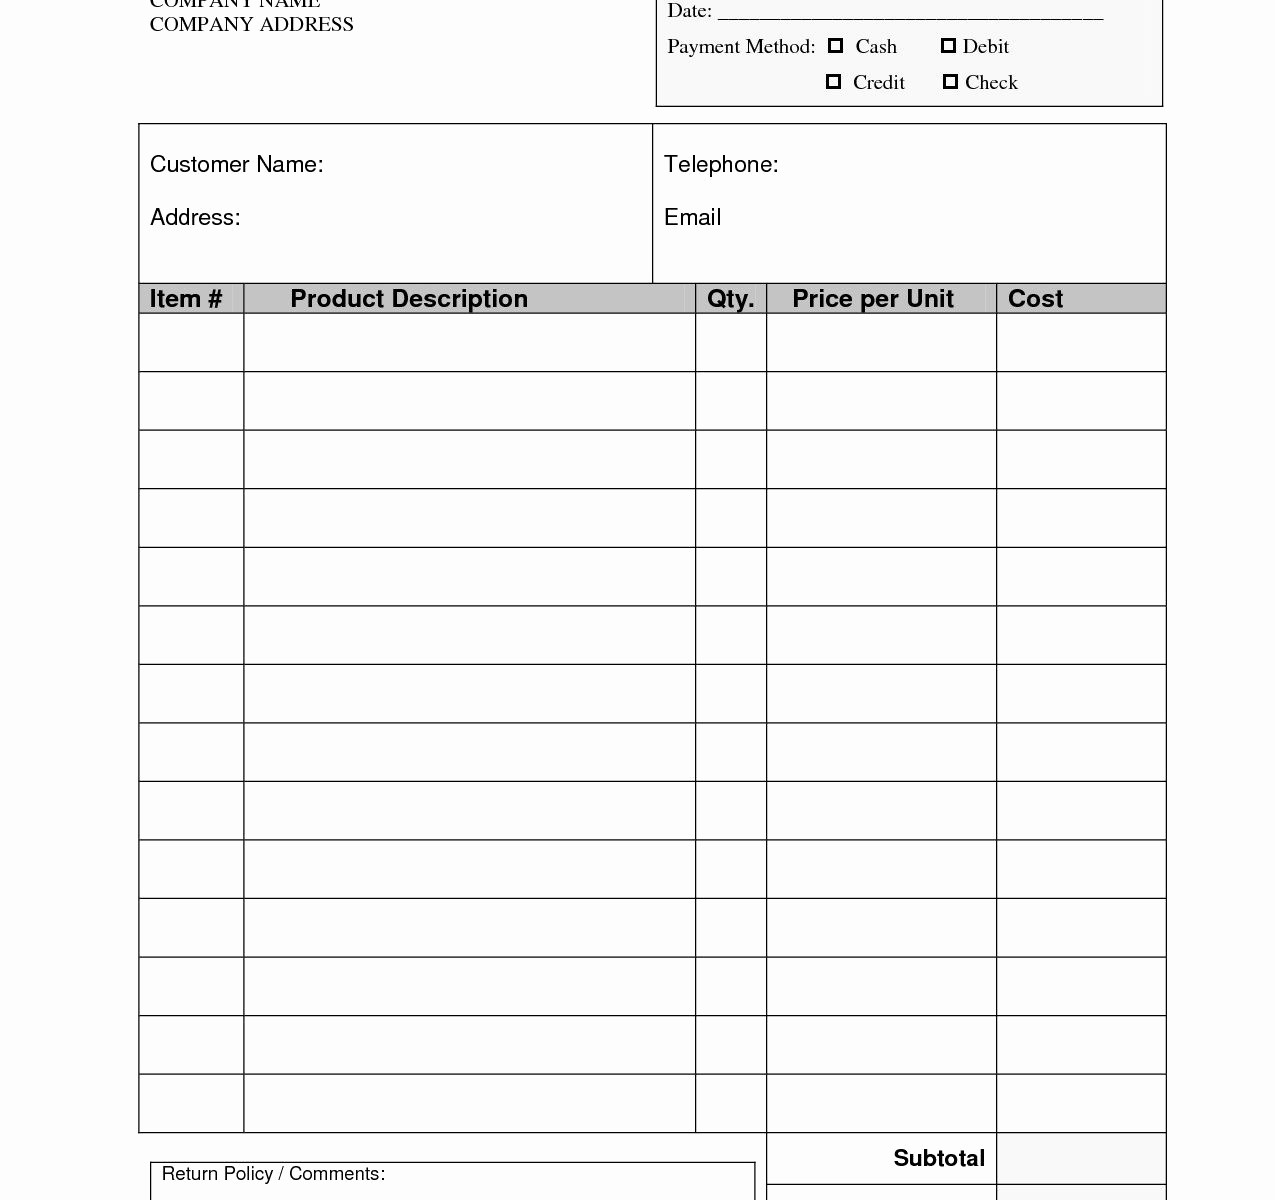 Invoice for Work Done Template Awesome Create Invoice for Work Done Template Hours Design Stock